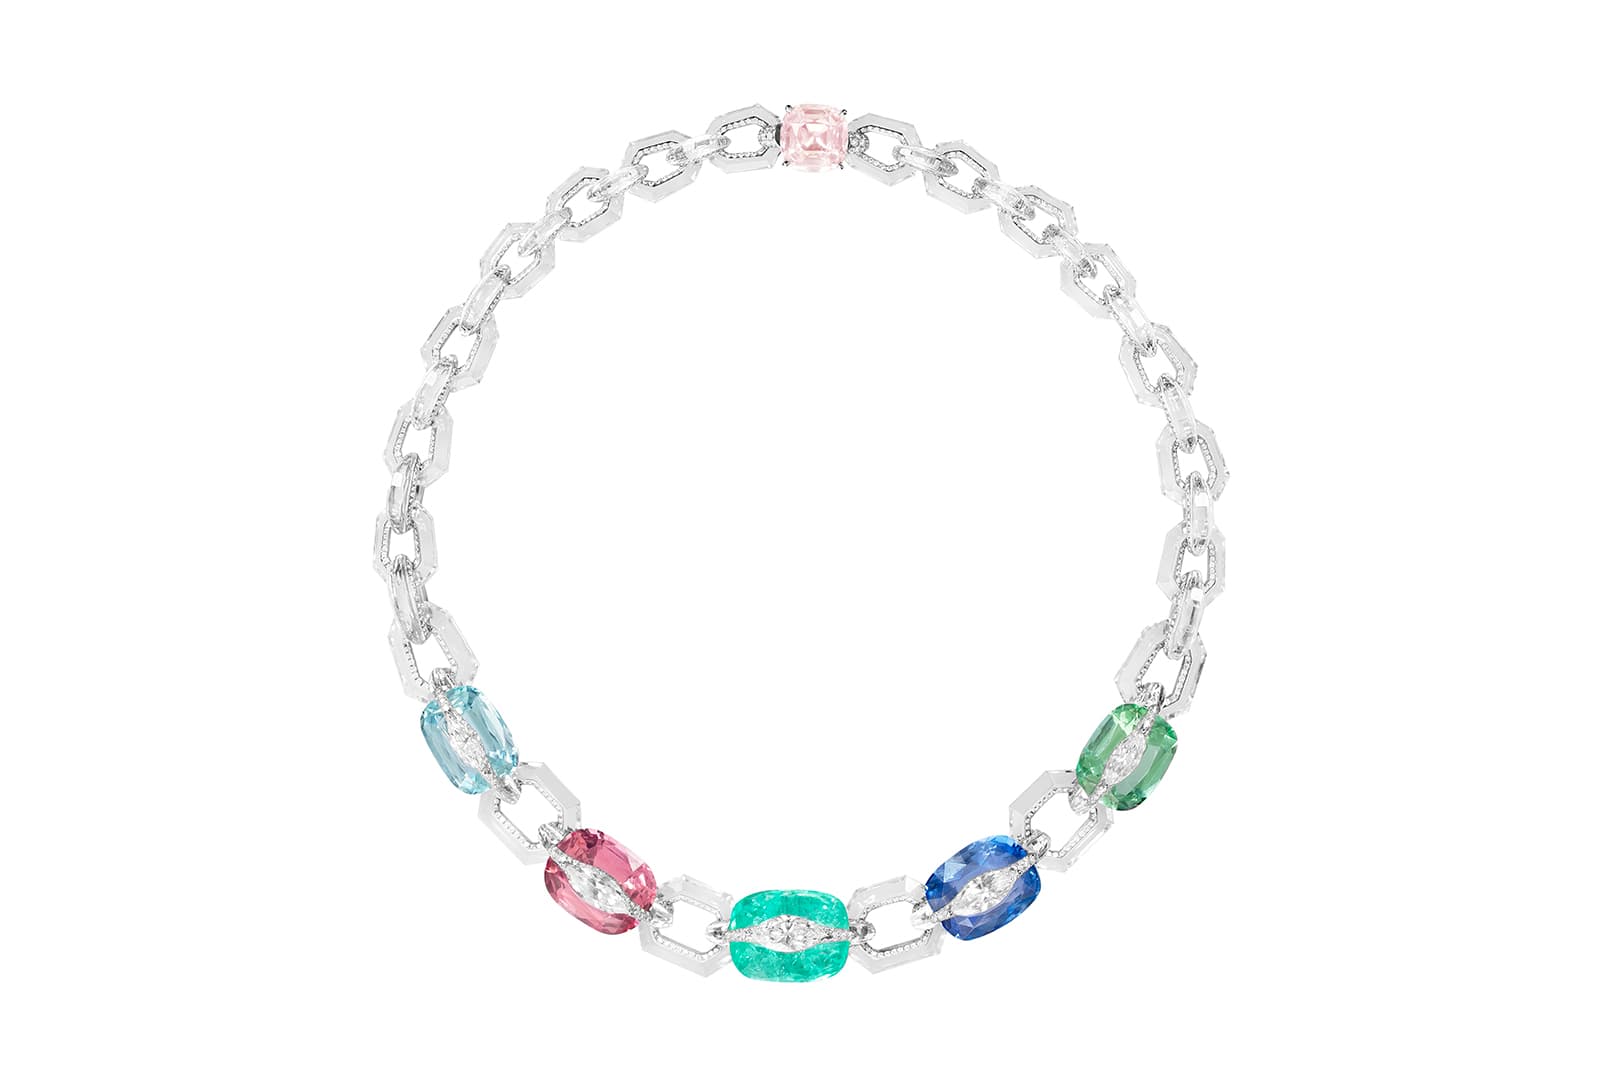 Boghossian Kissing Collection Coral Reef necklace with rock crystal links, set with sapphire, Paraiba tourmaline, pink and green tourmaline, aquamarine and kunzite, topped with white diamonds using the ‘Kissing’ technique in 18k white gold 